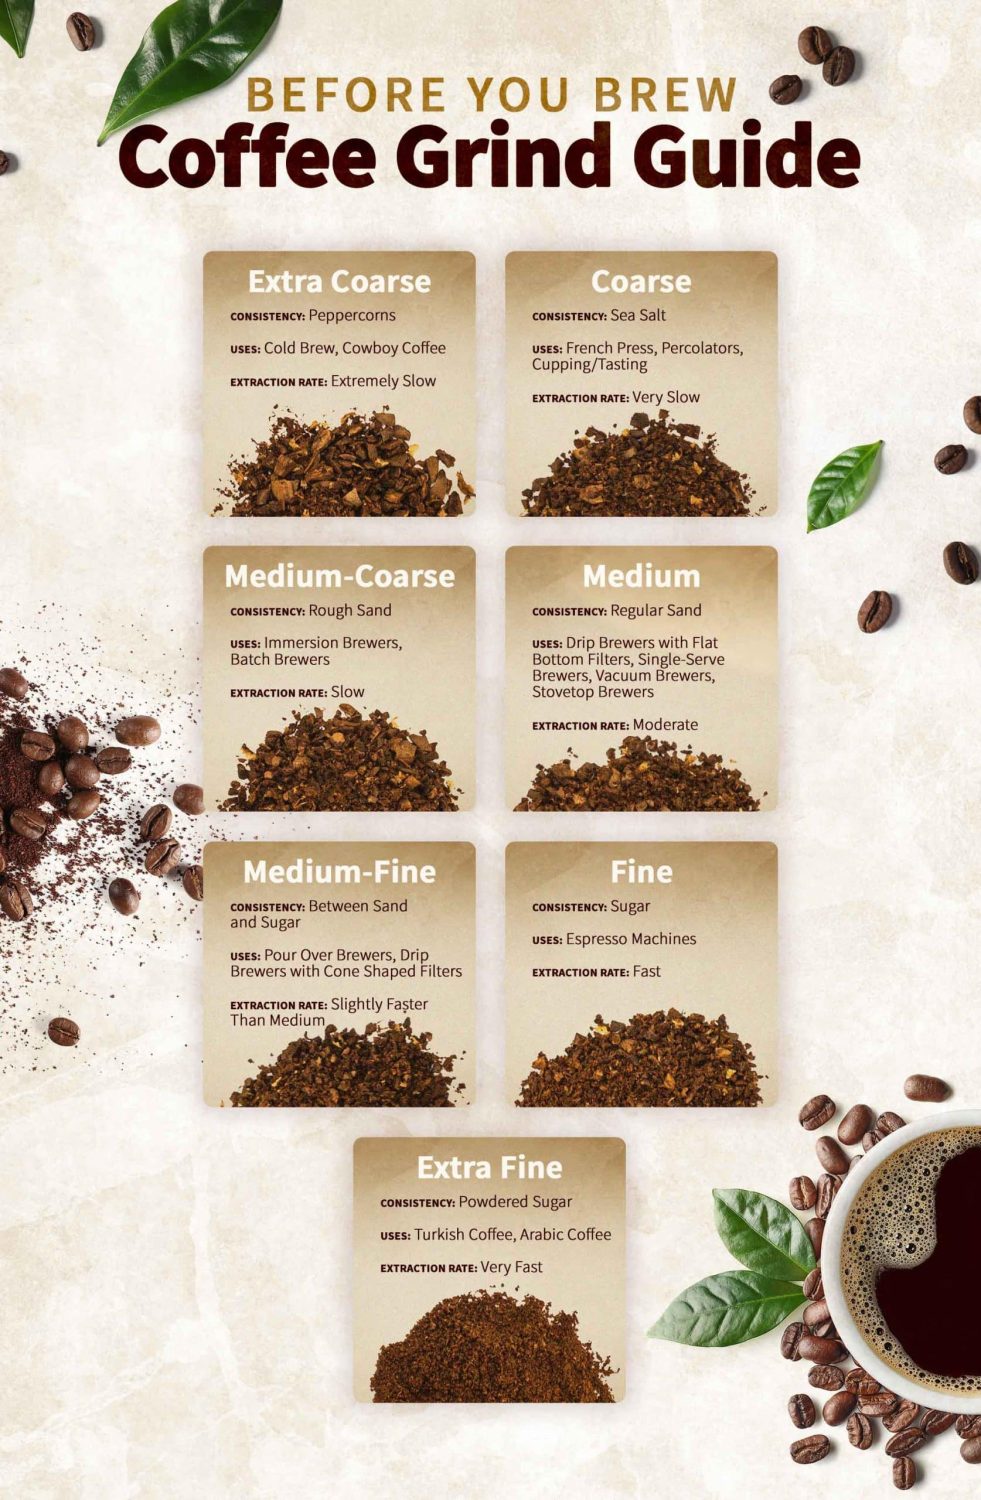 How Fine Or Coarse Should You Grind Coffee Beans For Different Brew Methods?